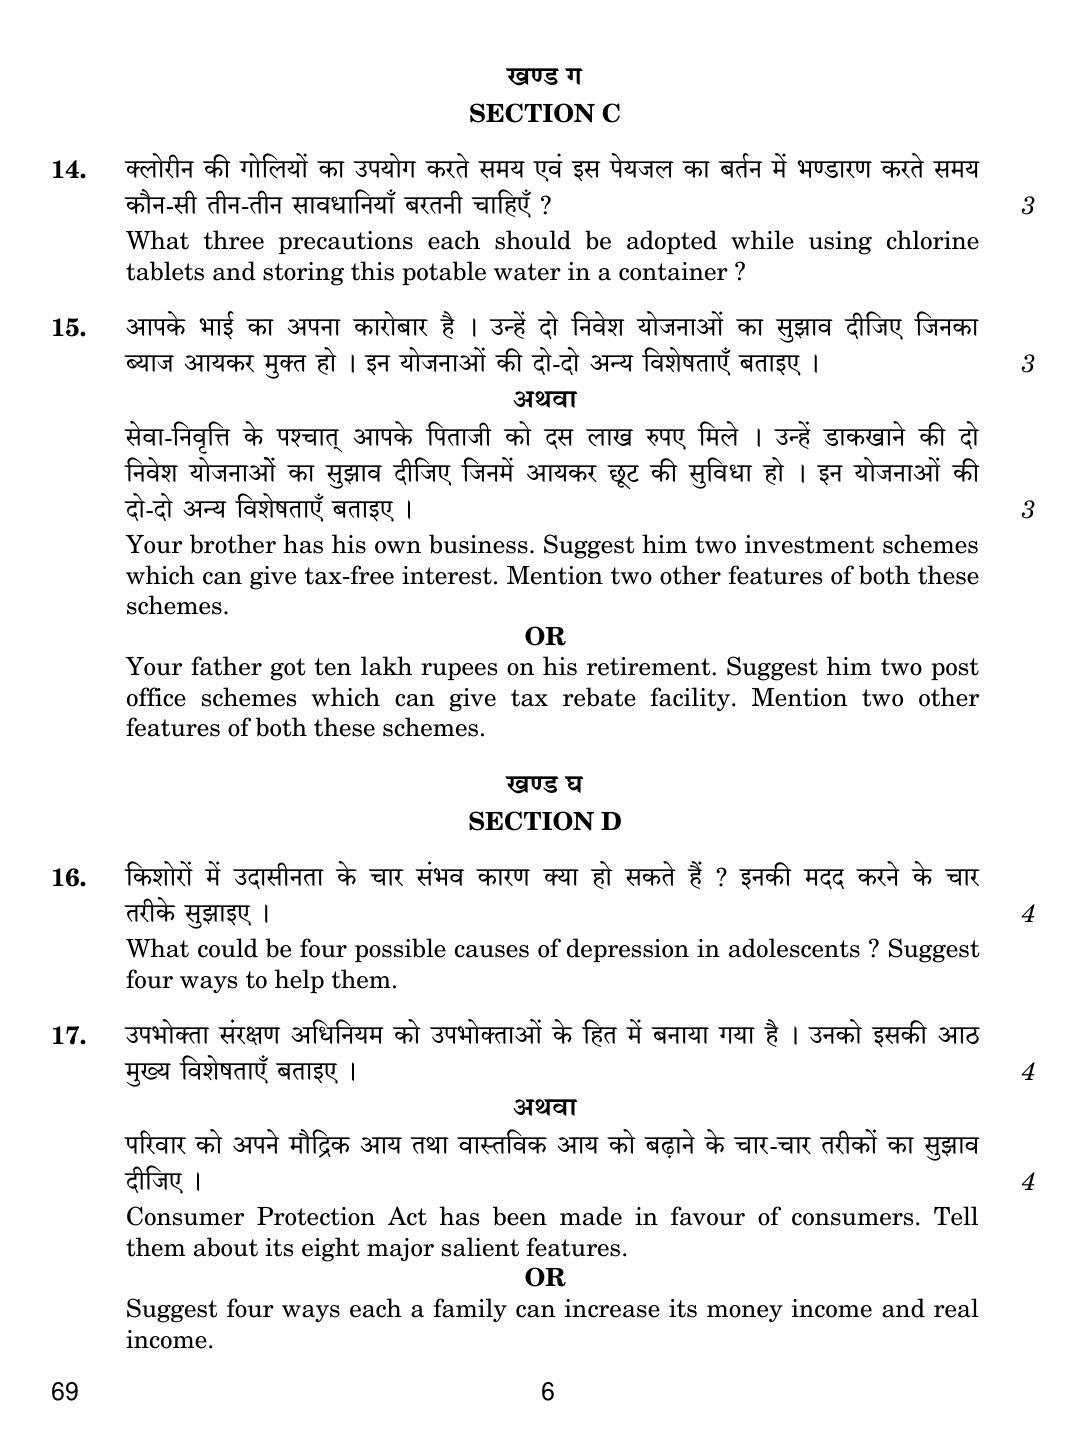 CBSE Class 12 69 Home Science 2019 Question Paper - Page 6